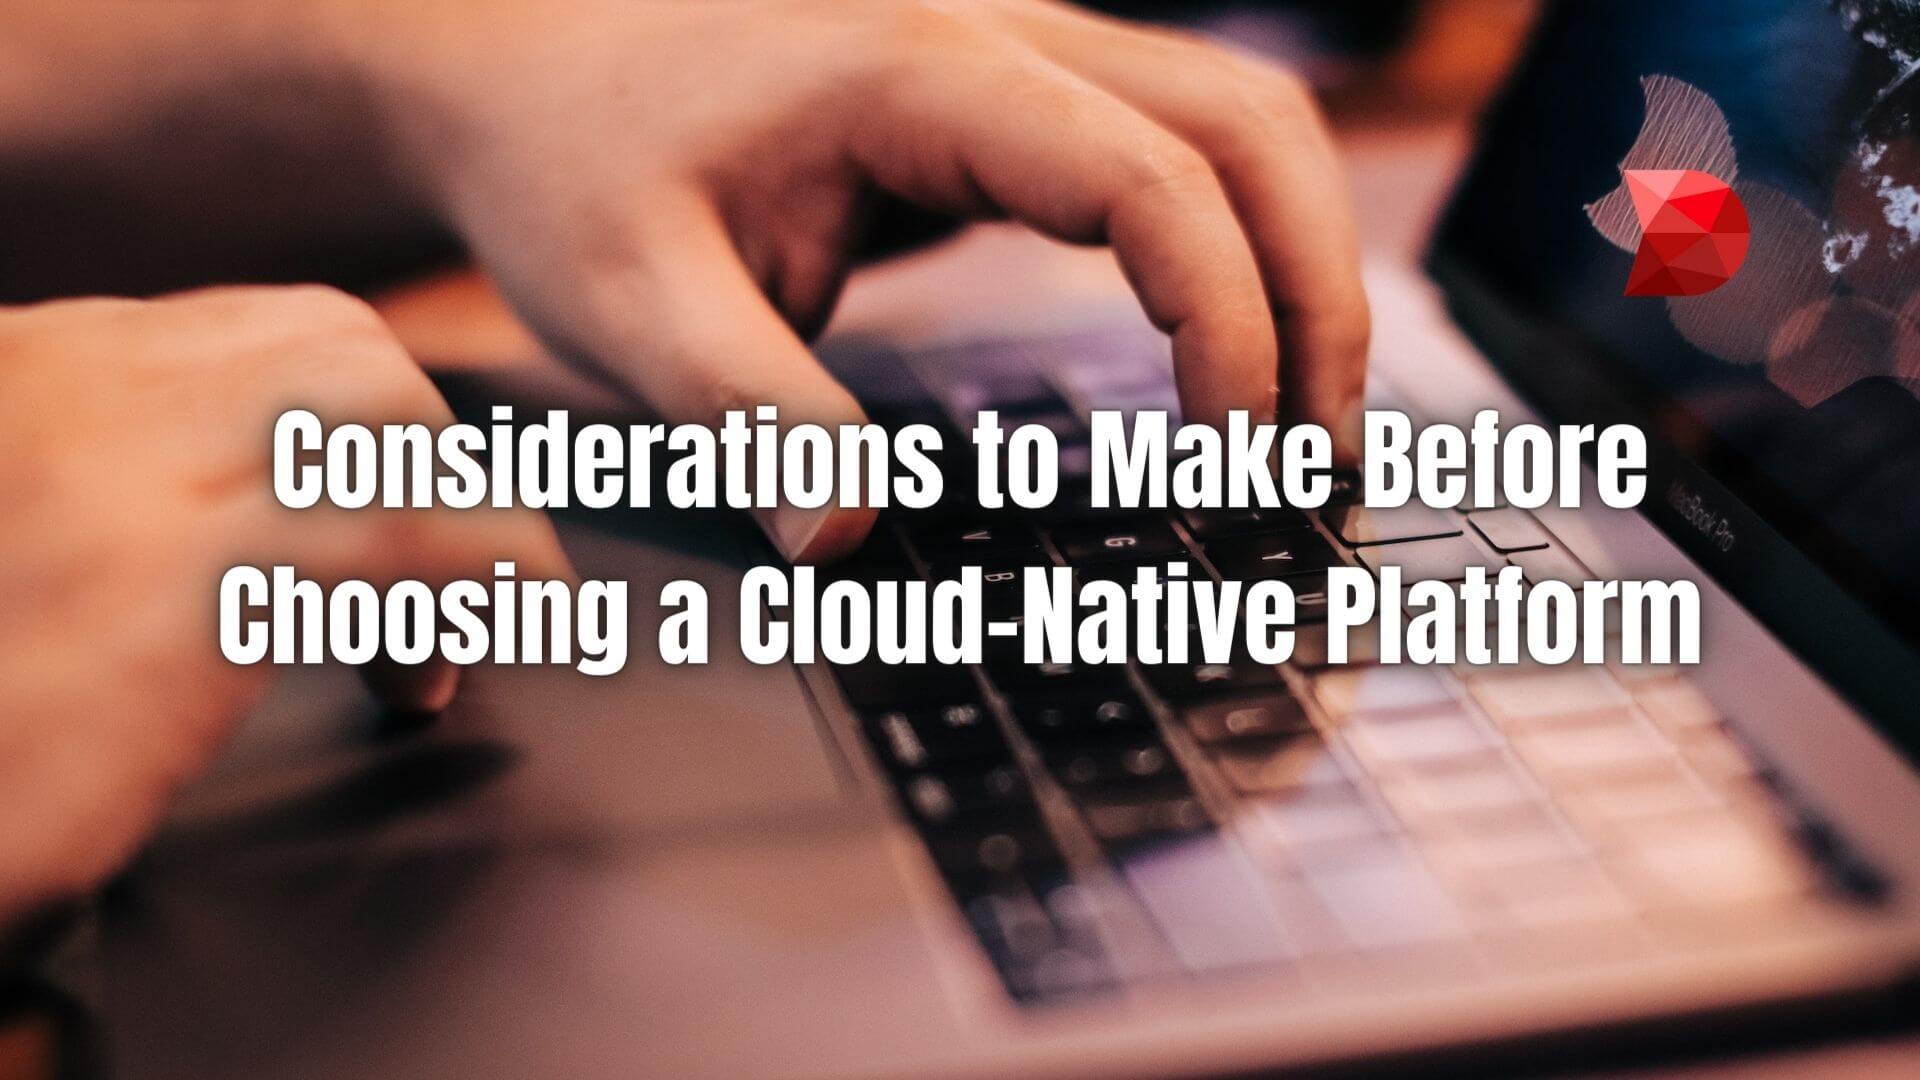 Moving to a cloud-native platform is a difficult process that requires careful preparation and execution. Here are the things to consider.